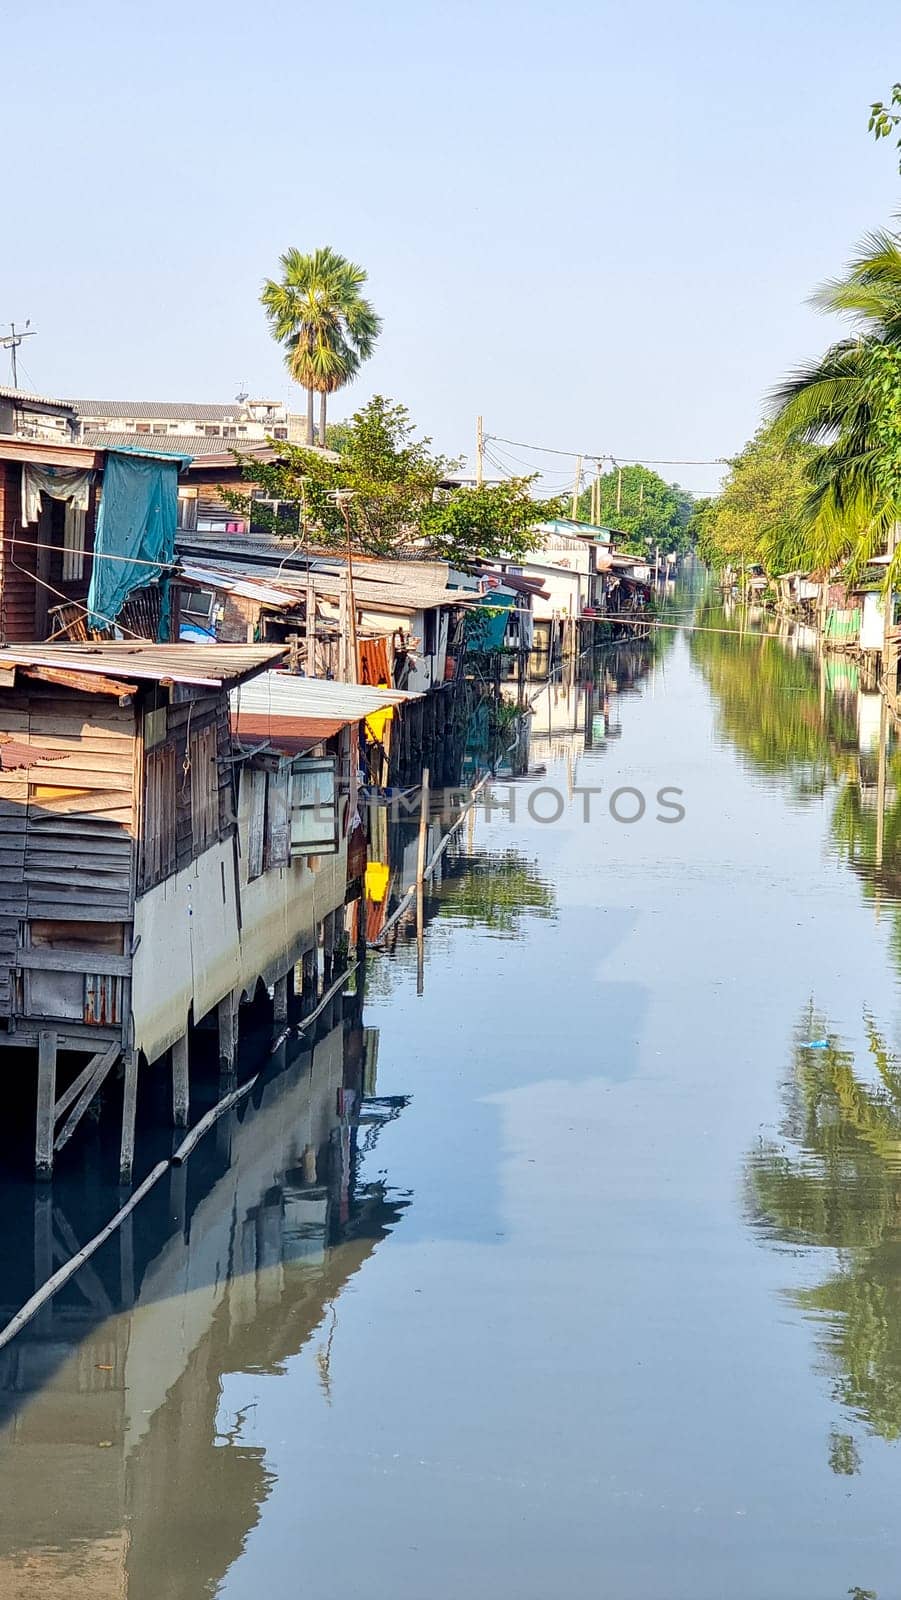 Serene body of water featuring charming houses floating on its surface, creating a picturesque scene of unique living arrangements by fokkebok